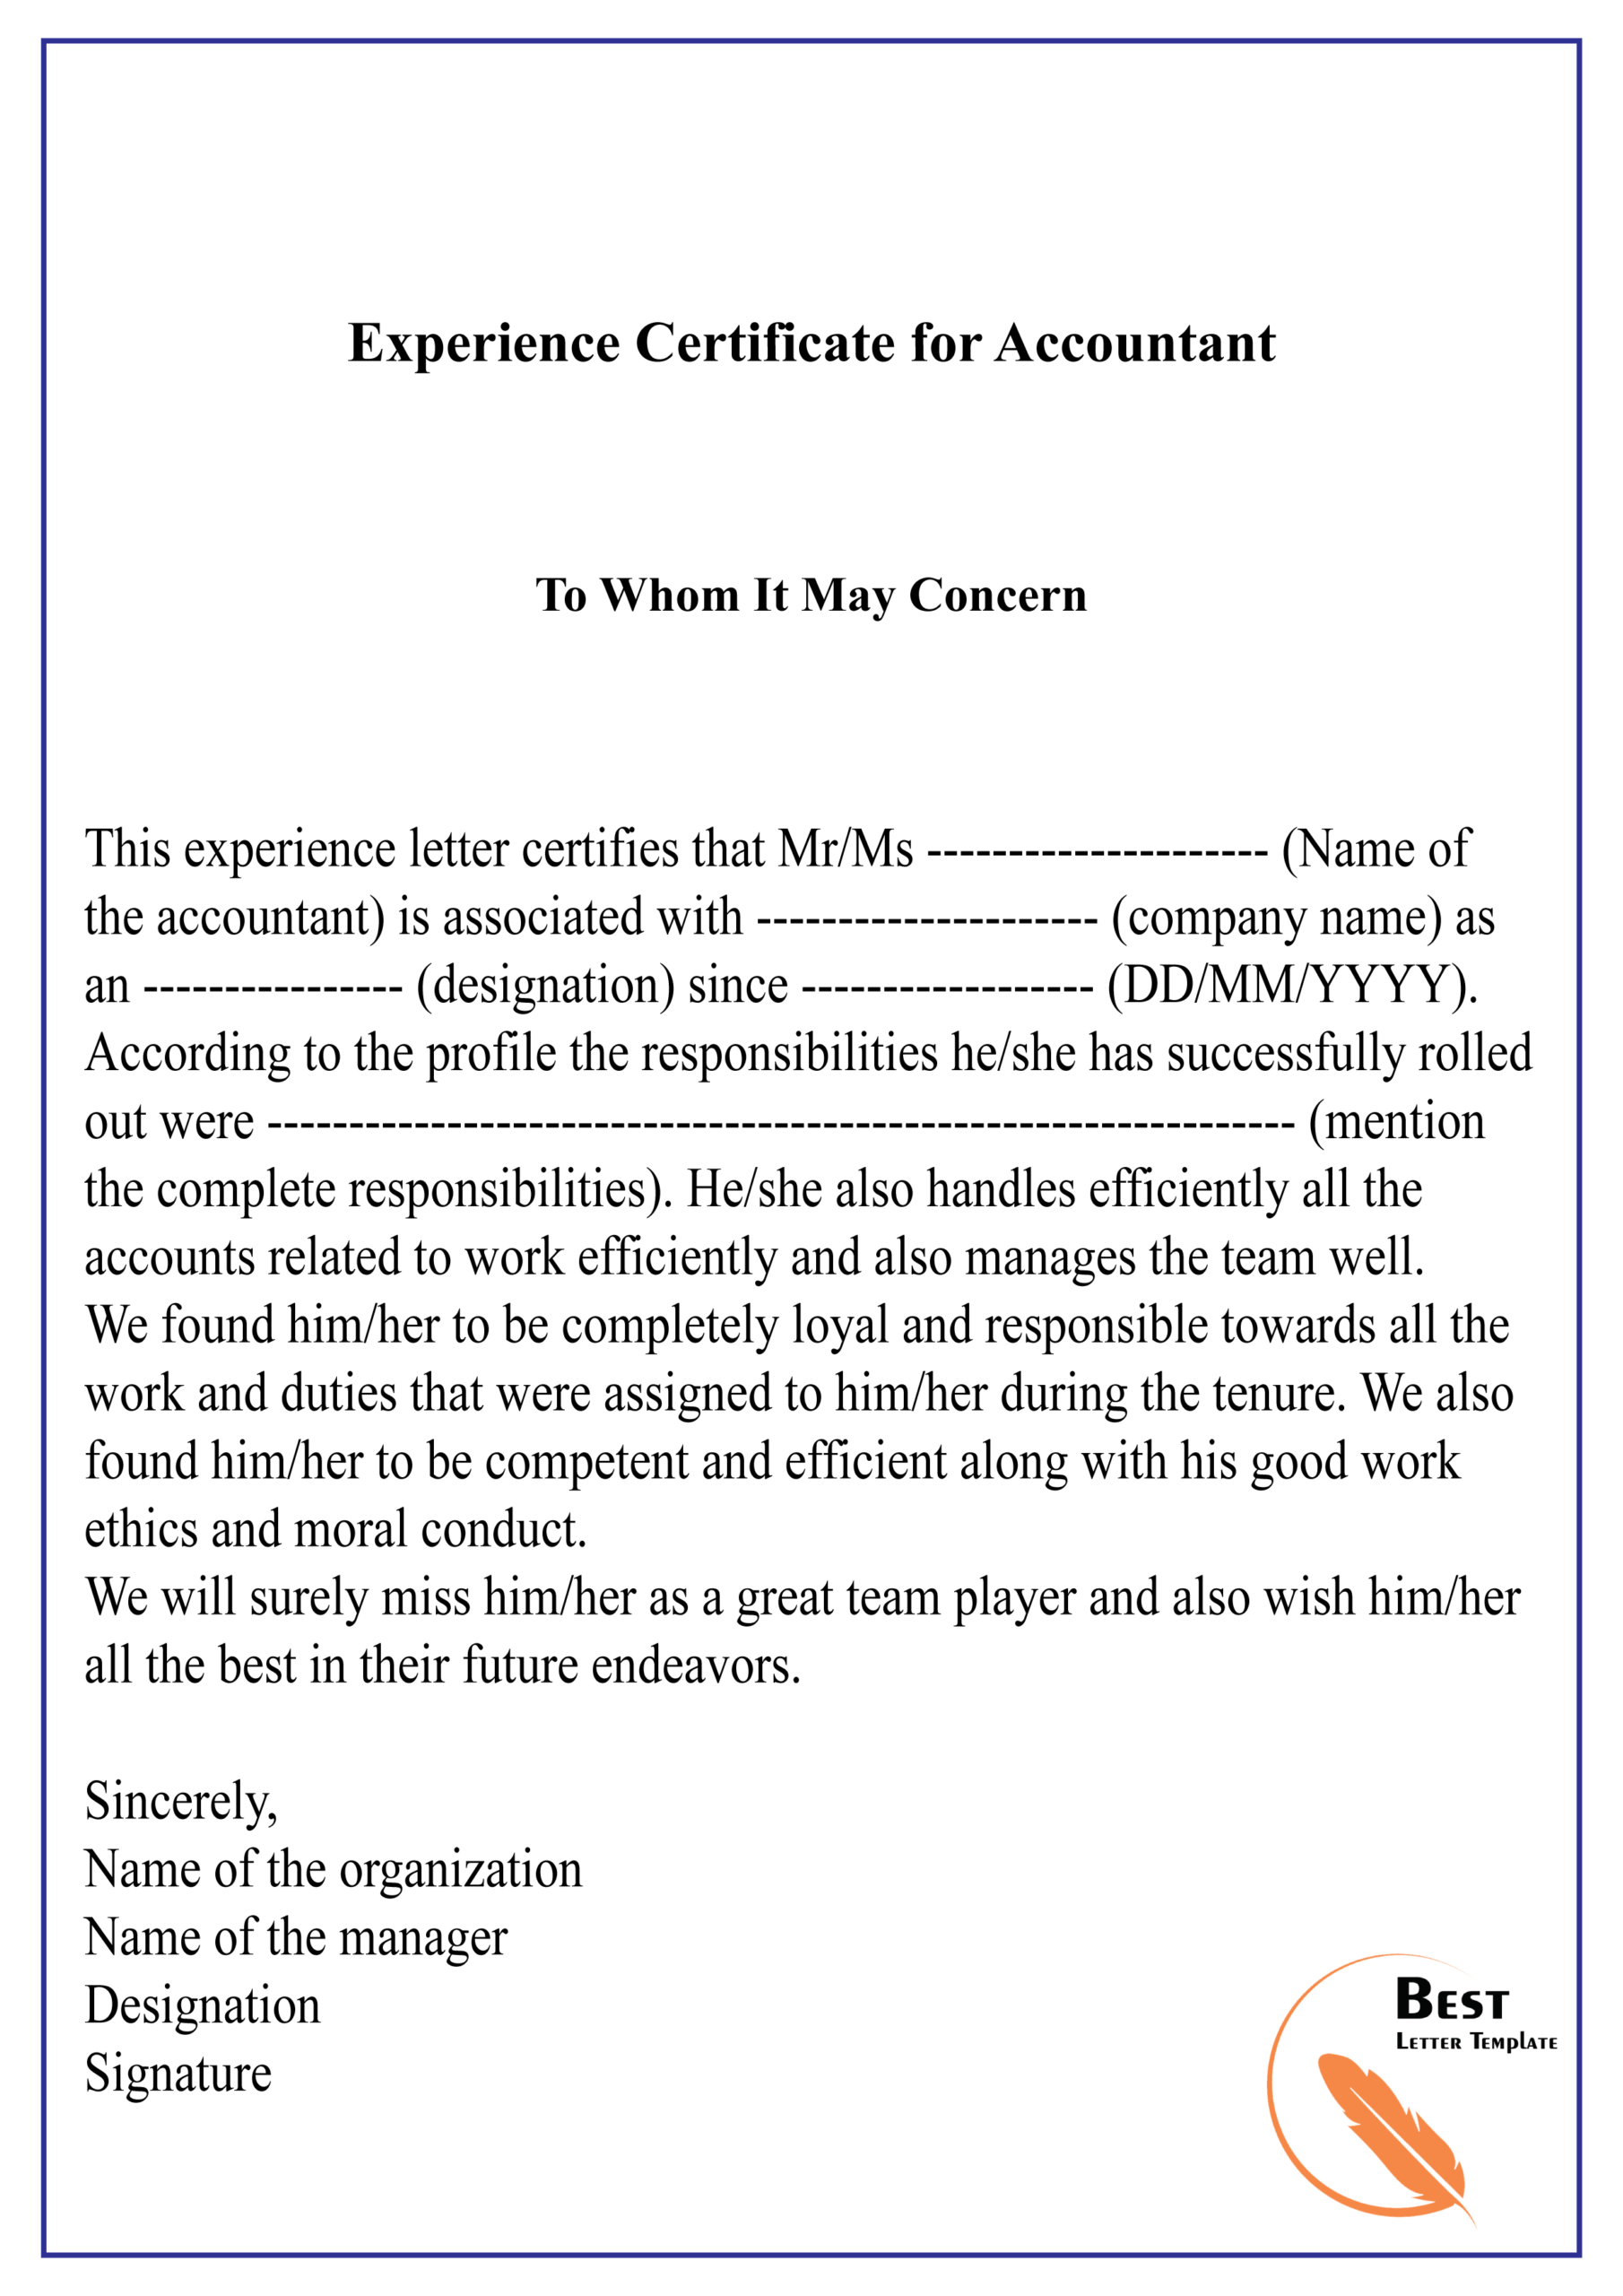 Experience Certificate For Accountant 01 | Best Letter Template In Certificate Of Experience Template